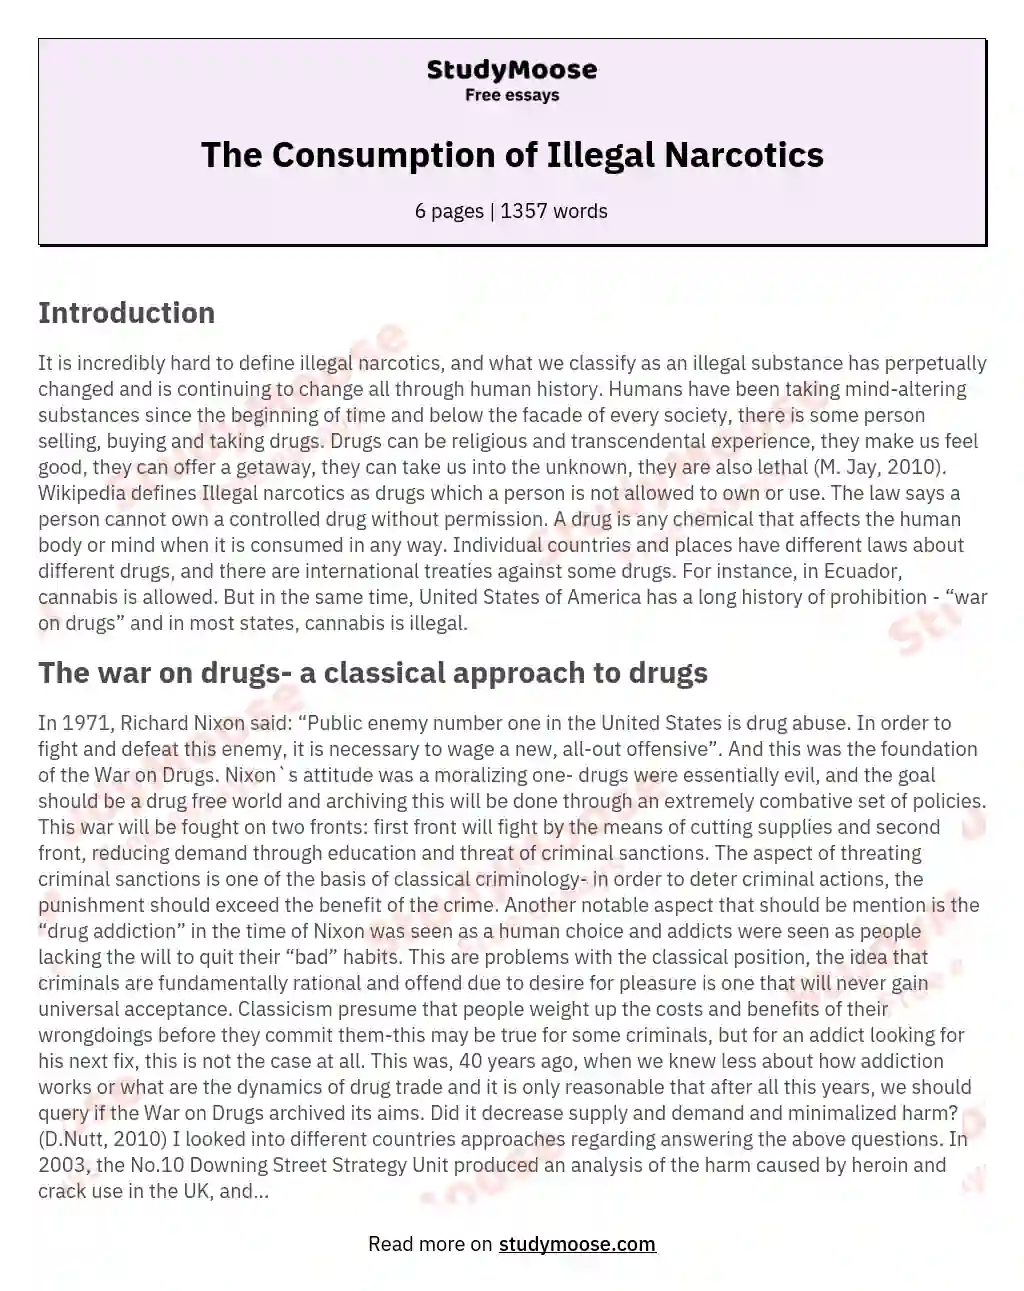 The Consumption of Illegal Narcotics